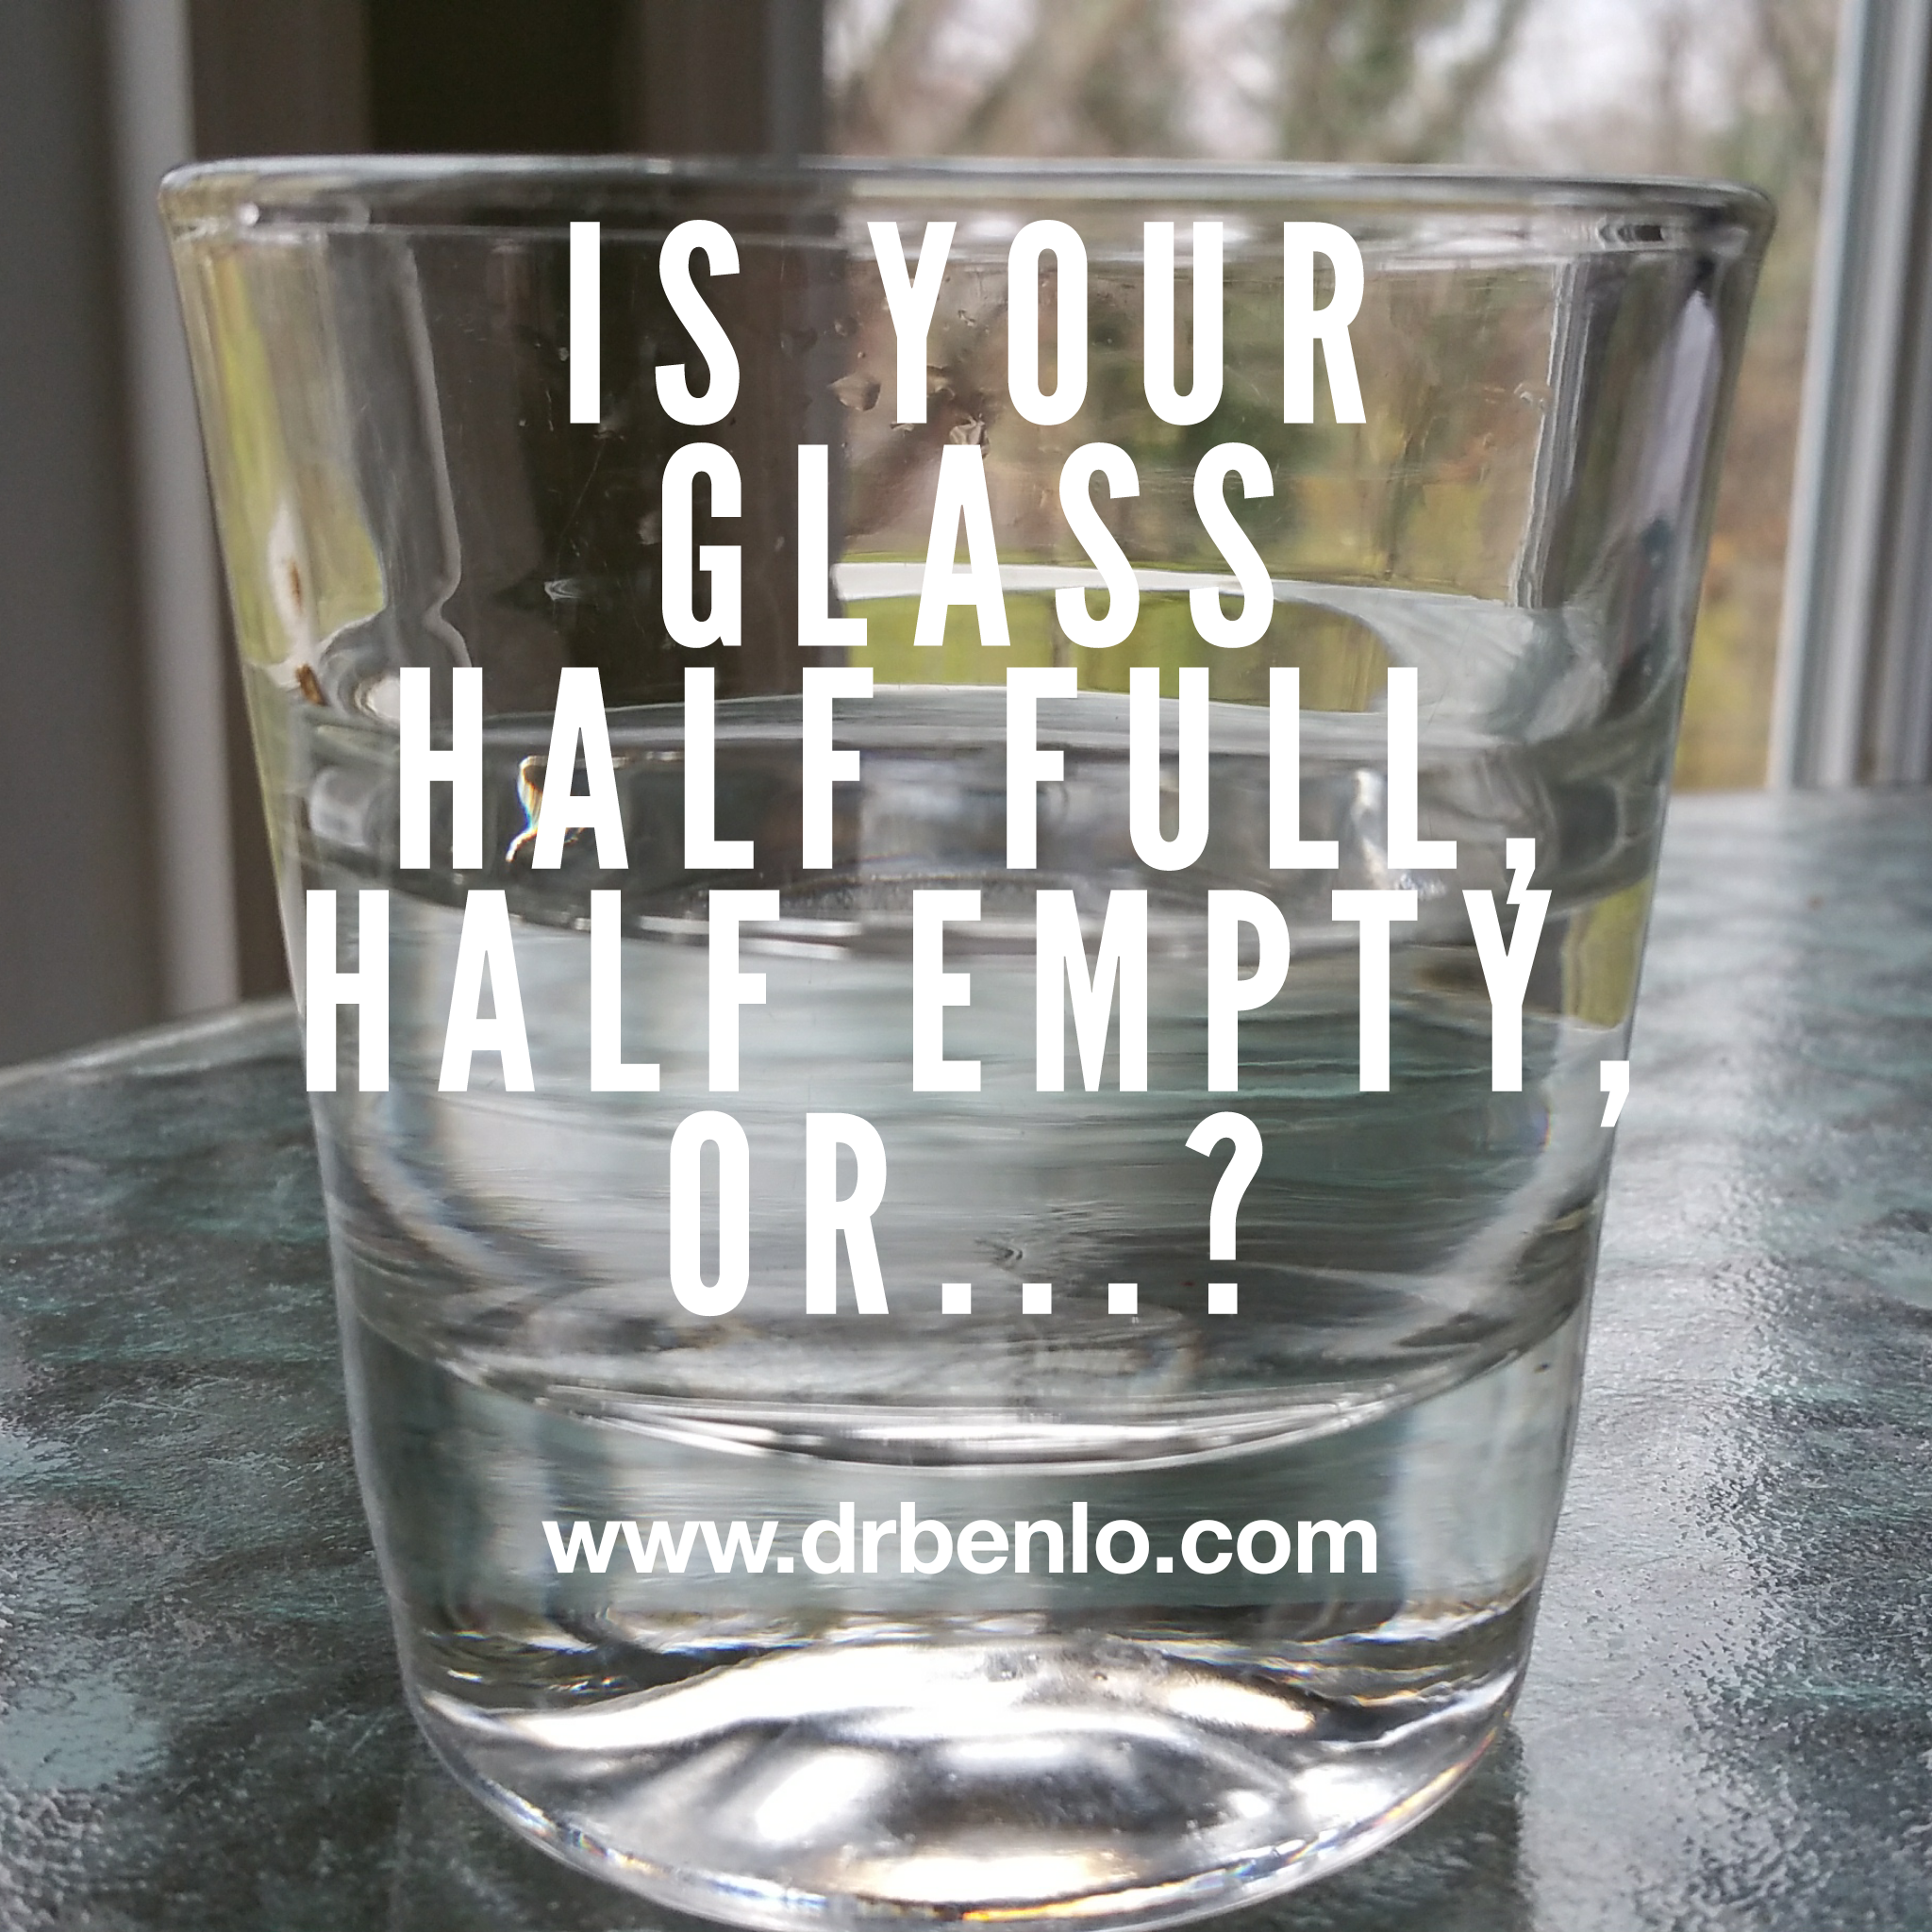 Half full or half empty? And does it matter?